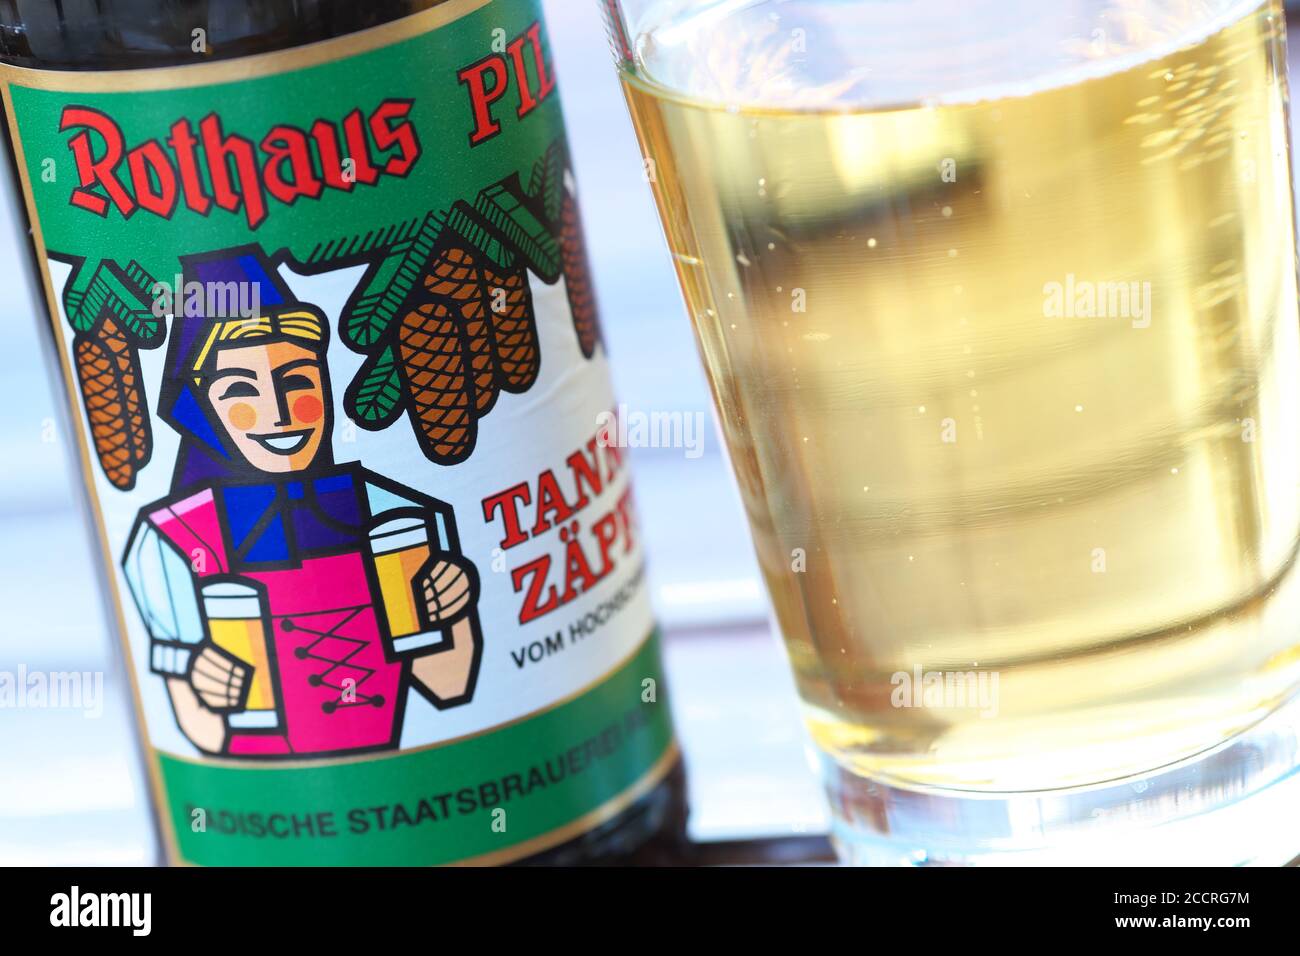 A bottle of German beer brand Rothaus Pils Tannenzapfle with beer glass Stock Photo